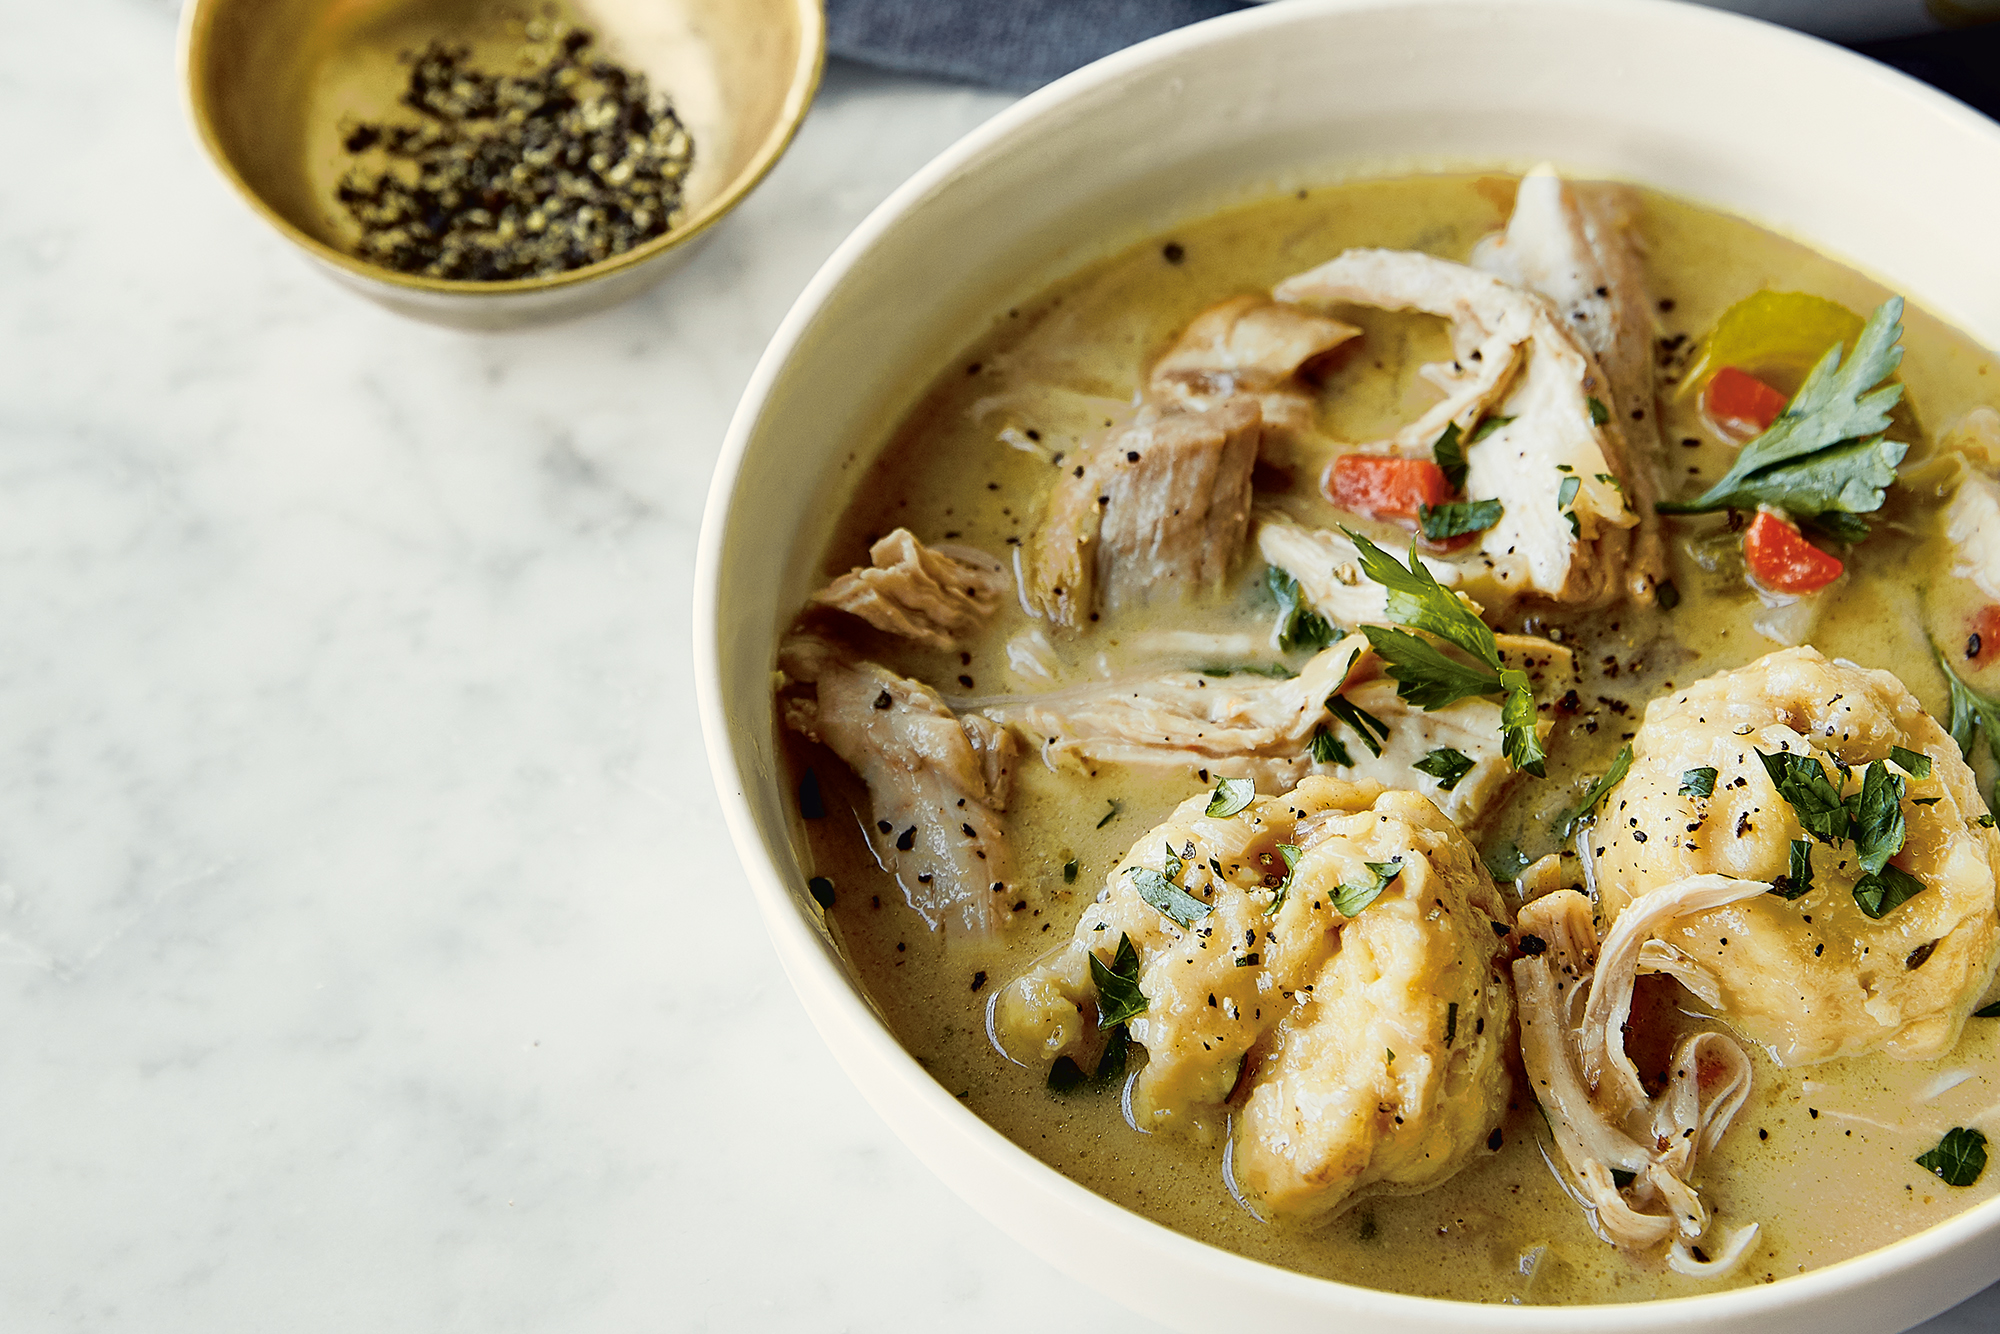 Chicken soup and dumplings (Image: Cravings: Hungry for More/Michael Joseph)